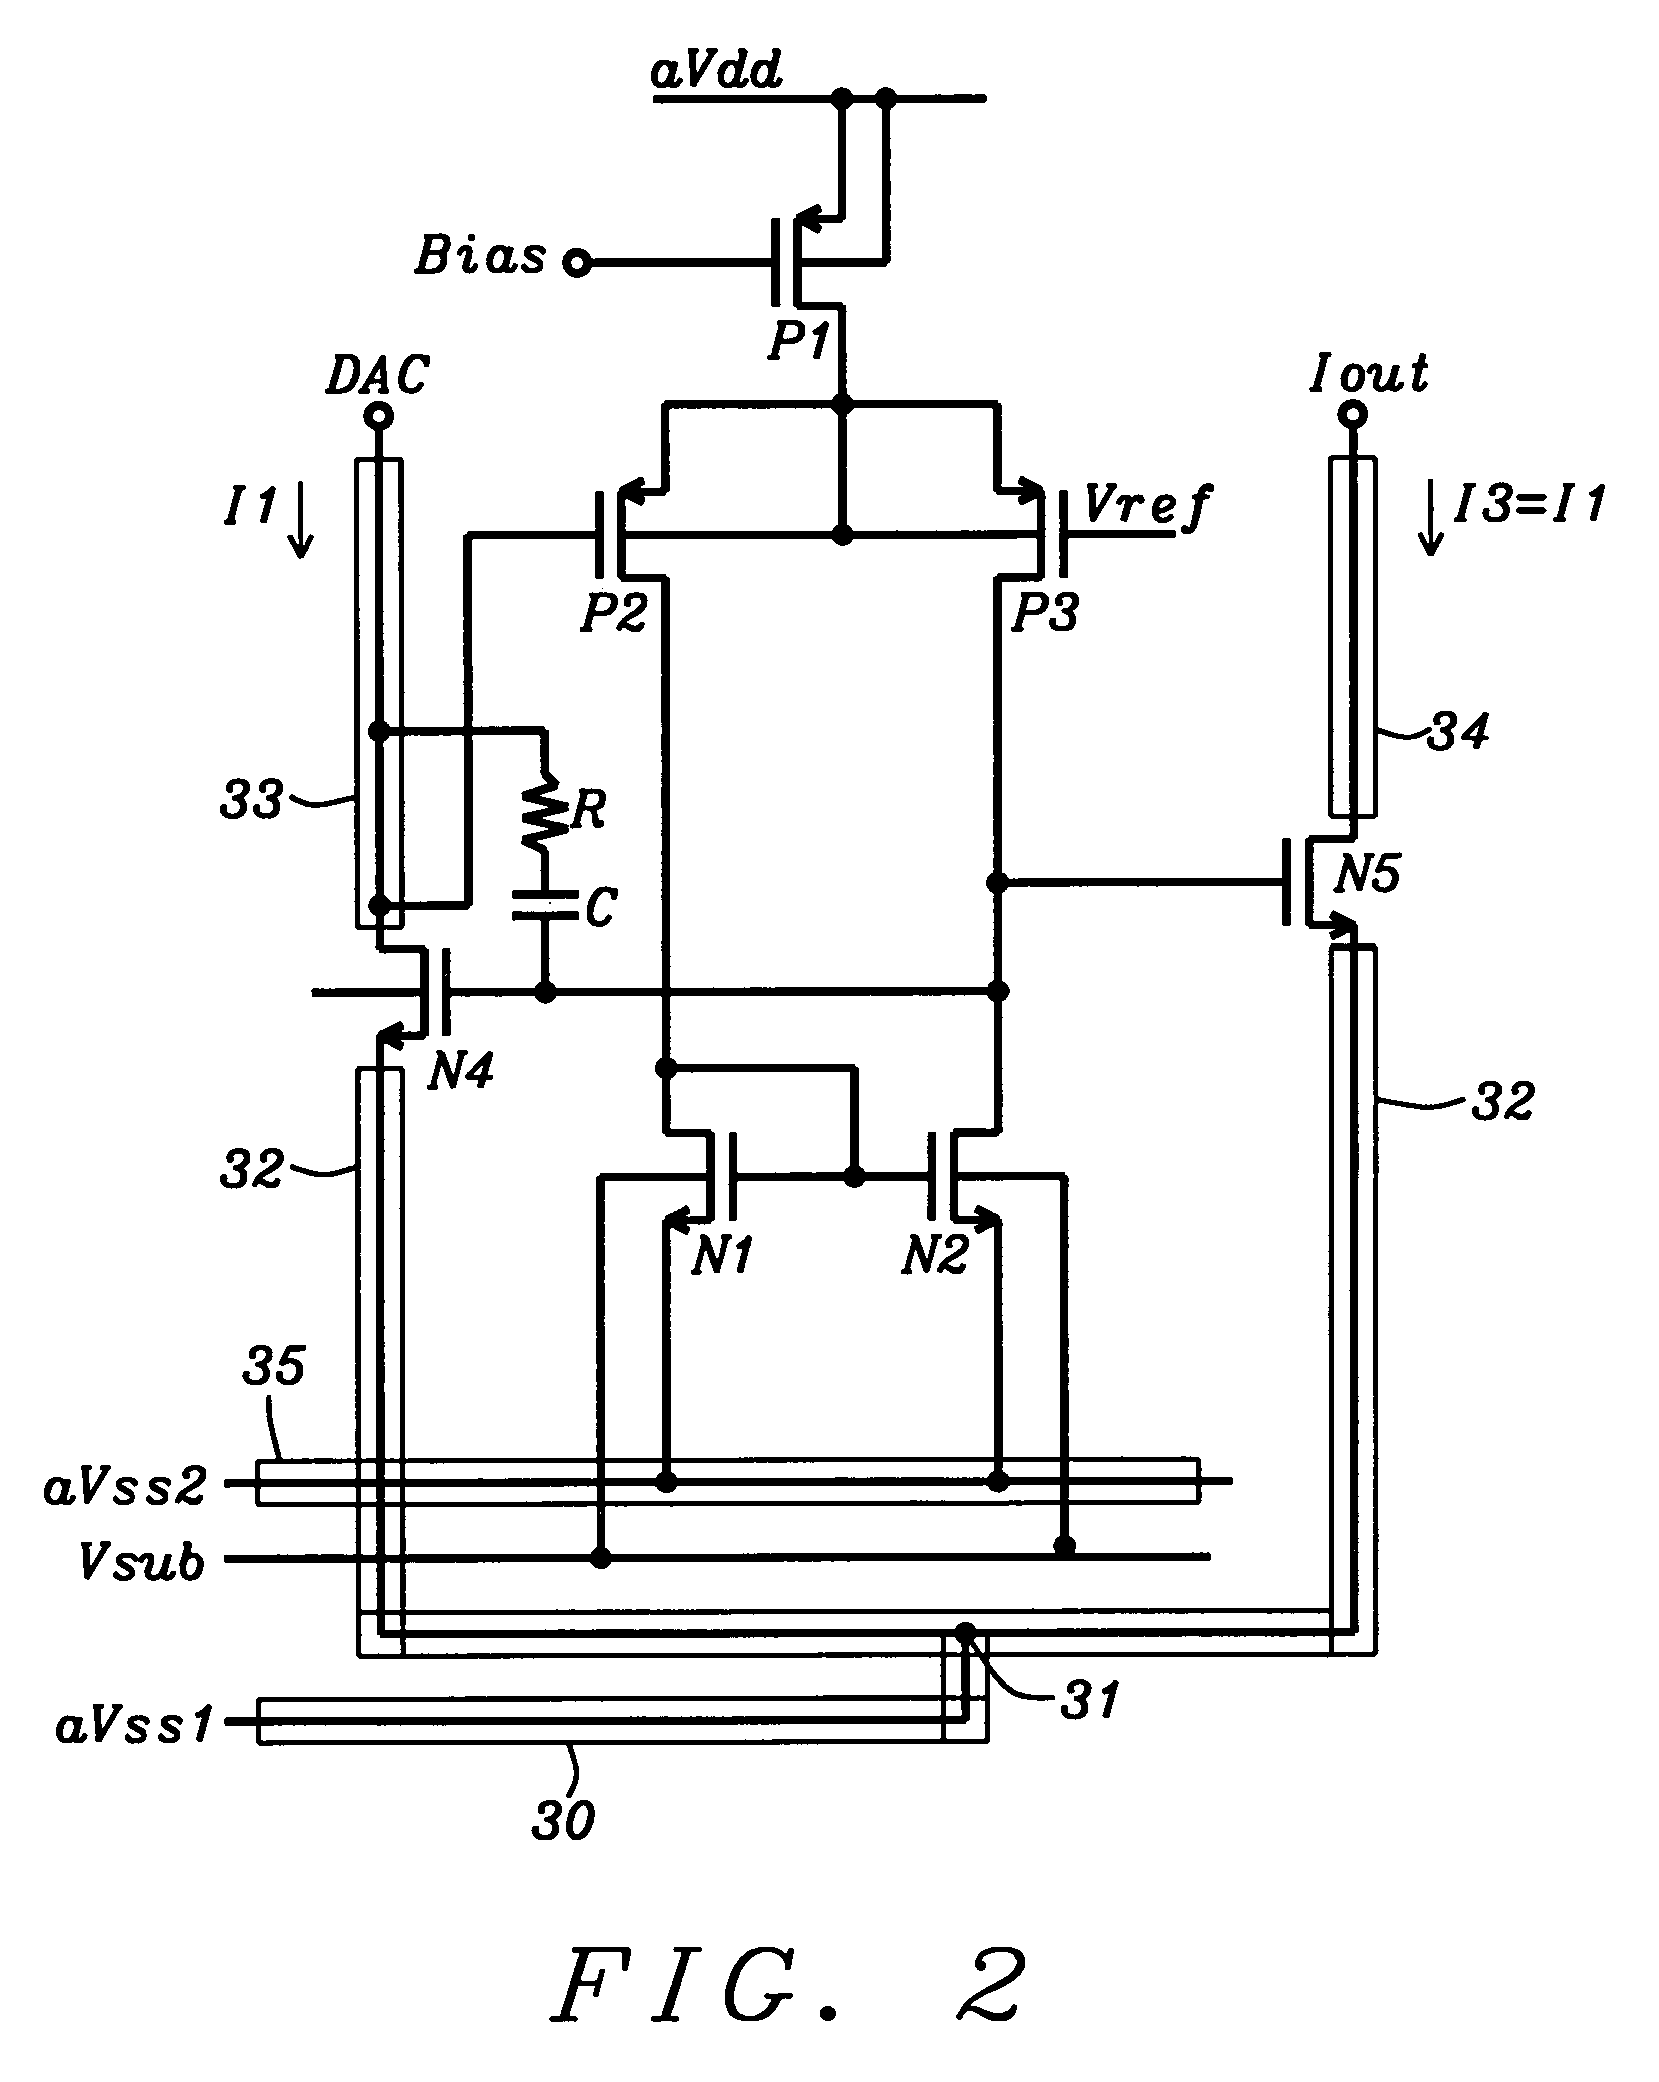 Method for implementation of a low noise, high accuracy current mirror for audio applications